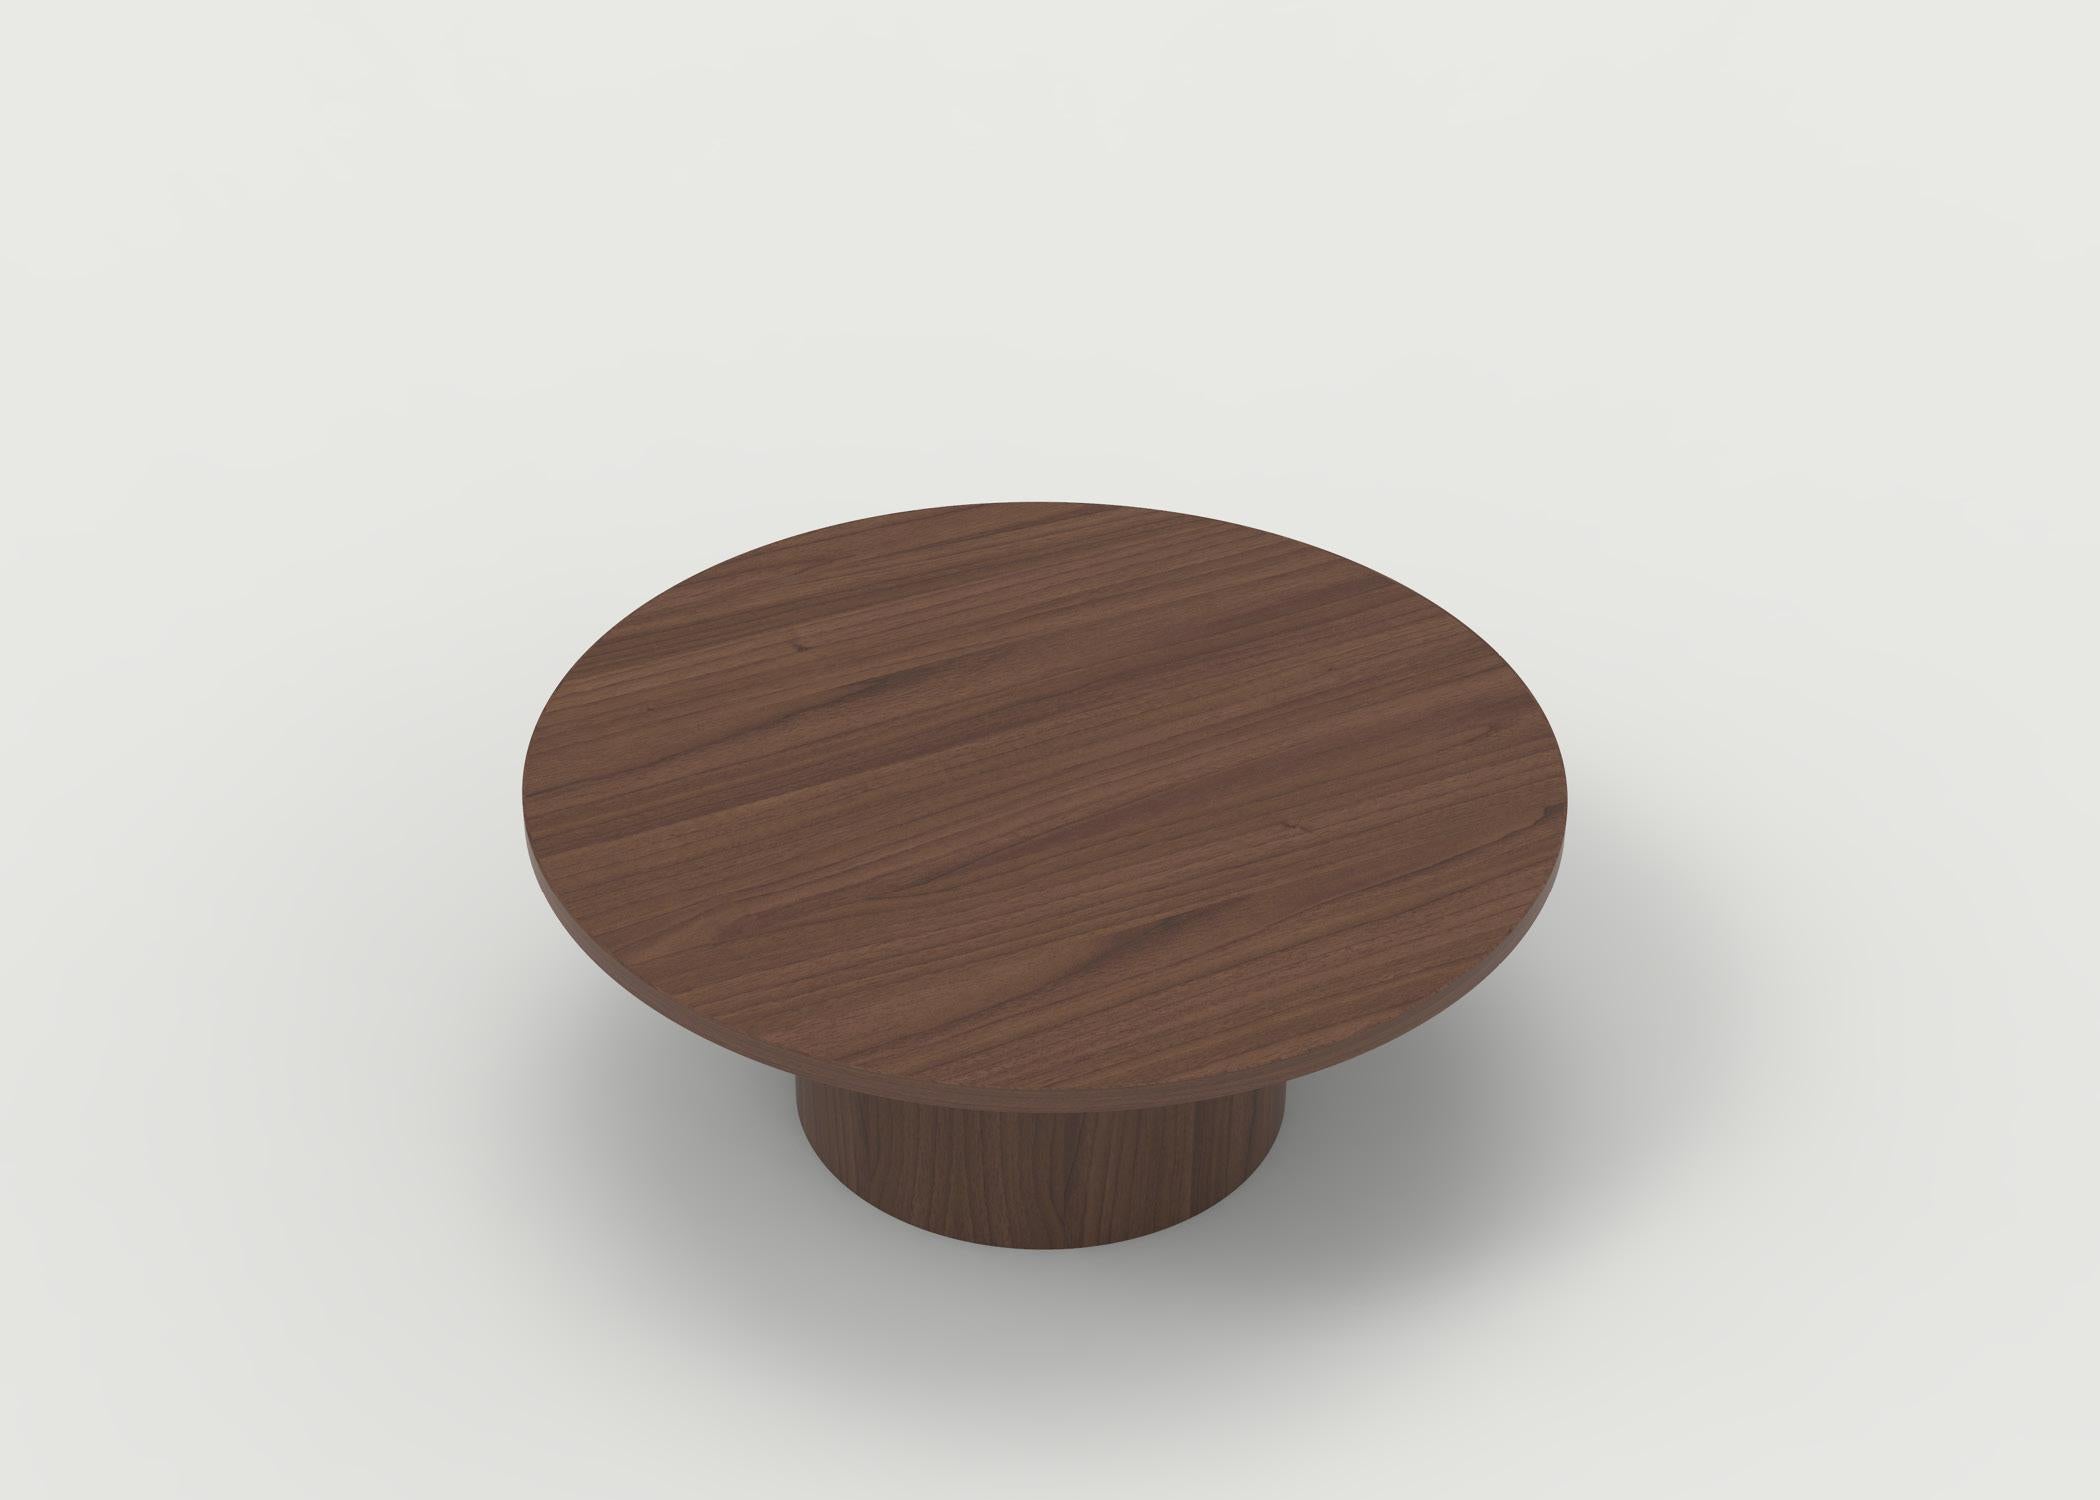 The Benson coffee table is shown with an oak wood top in natural finish with a round base and painted round posts. It can be customized in your choice of wood and finish as well as size. Price is for item shown in primary photo in all walnut